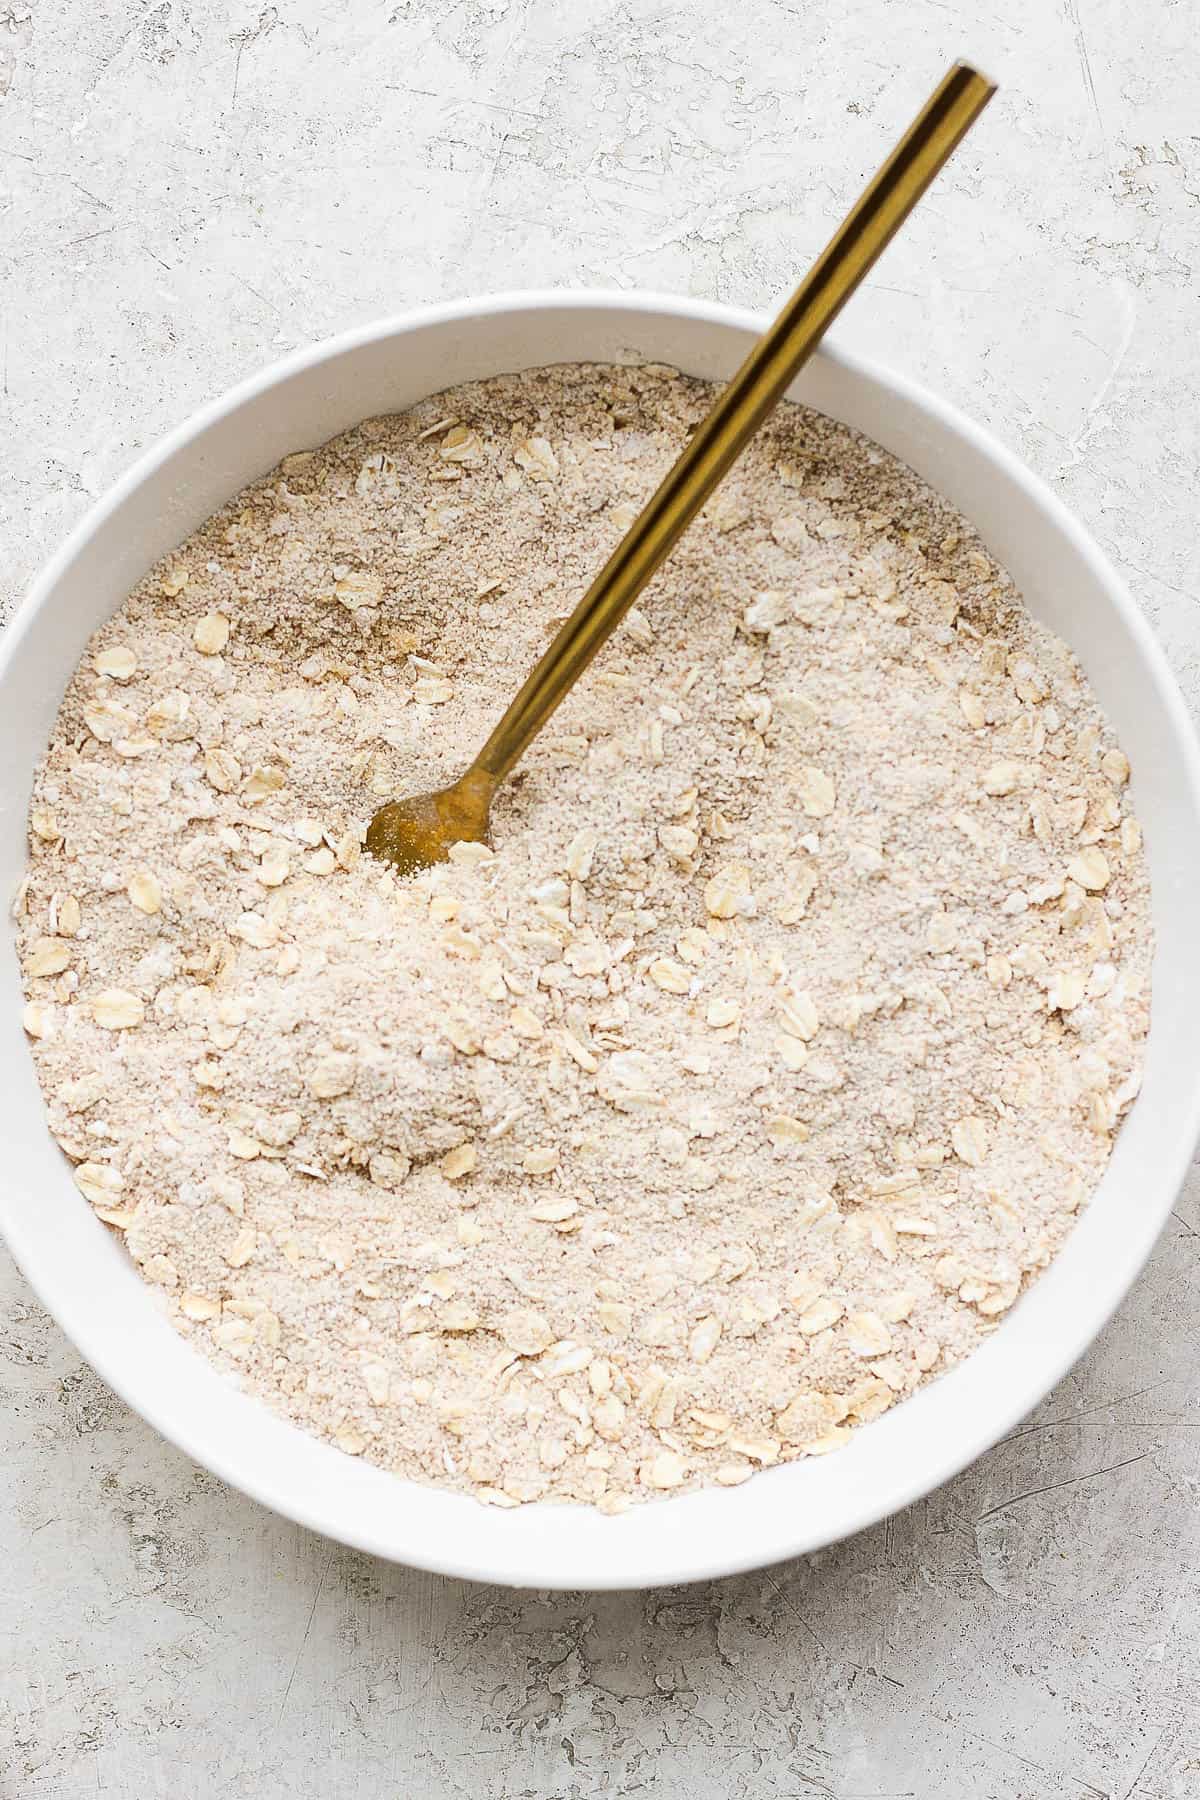 The dry ingredients all mixed together in a white bowl with a spoon.